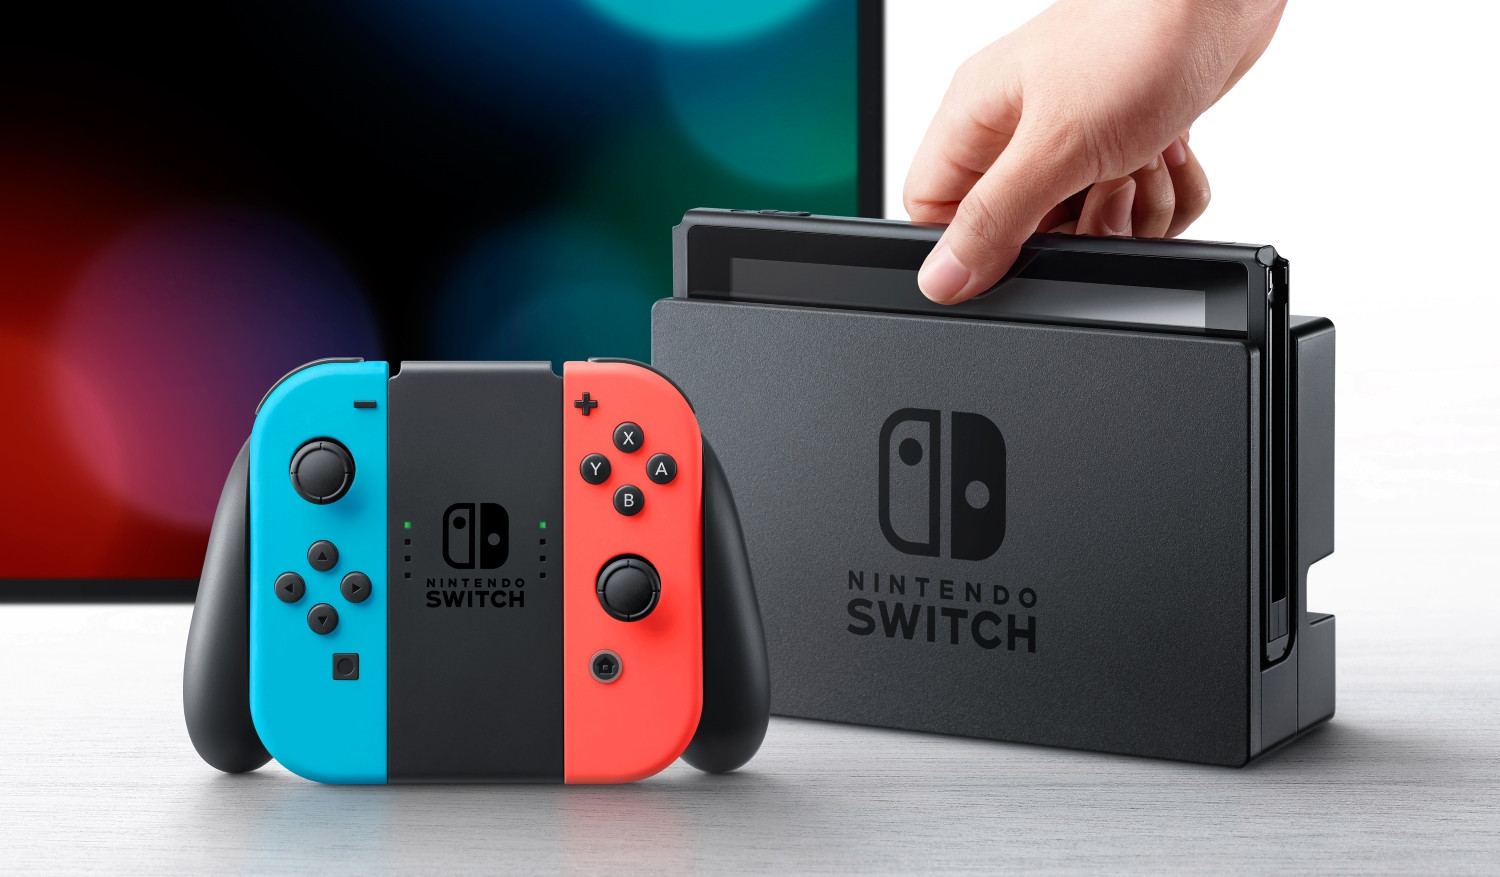 The Nintendo Switch is coming to Brazil soon - My Nintendo News